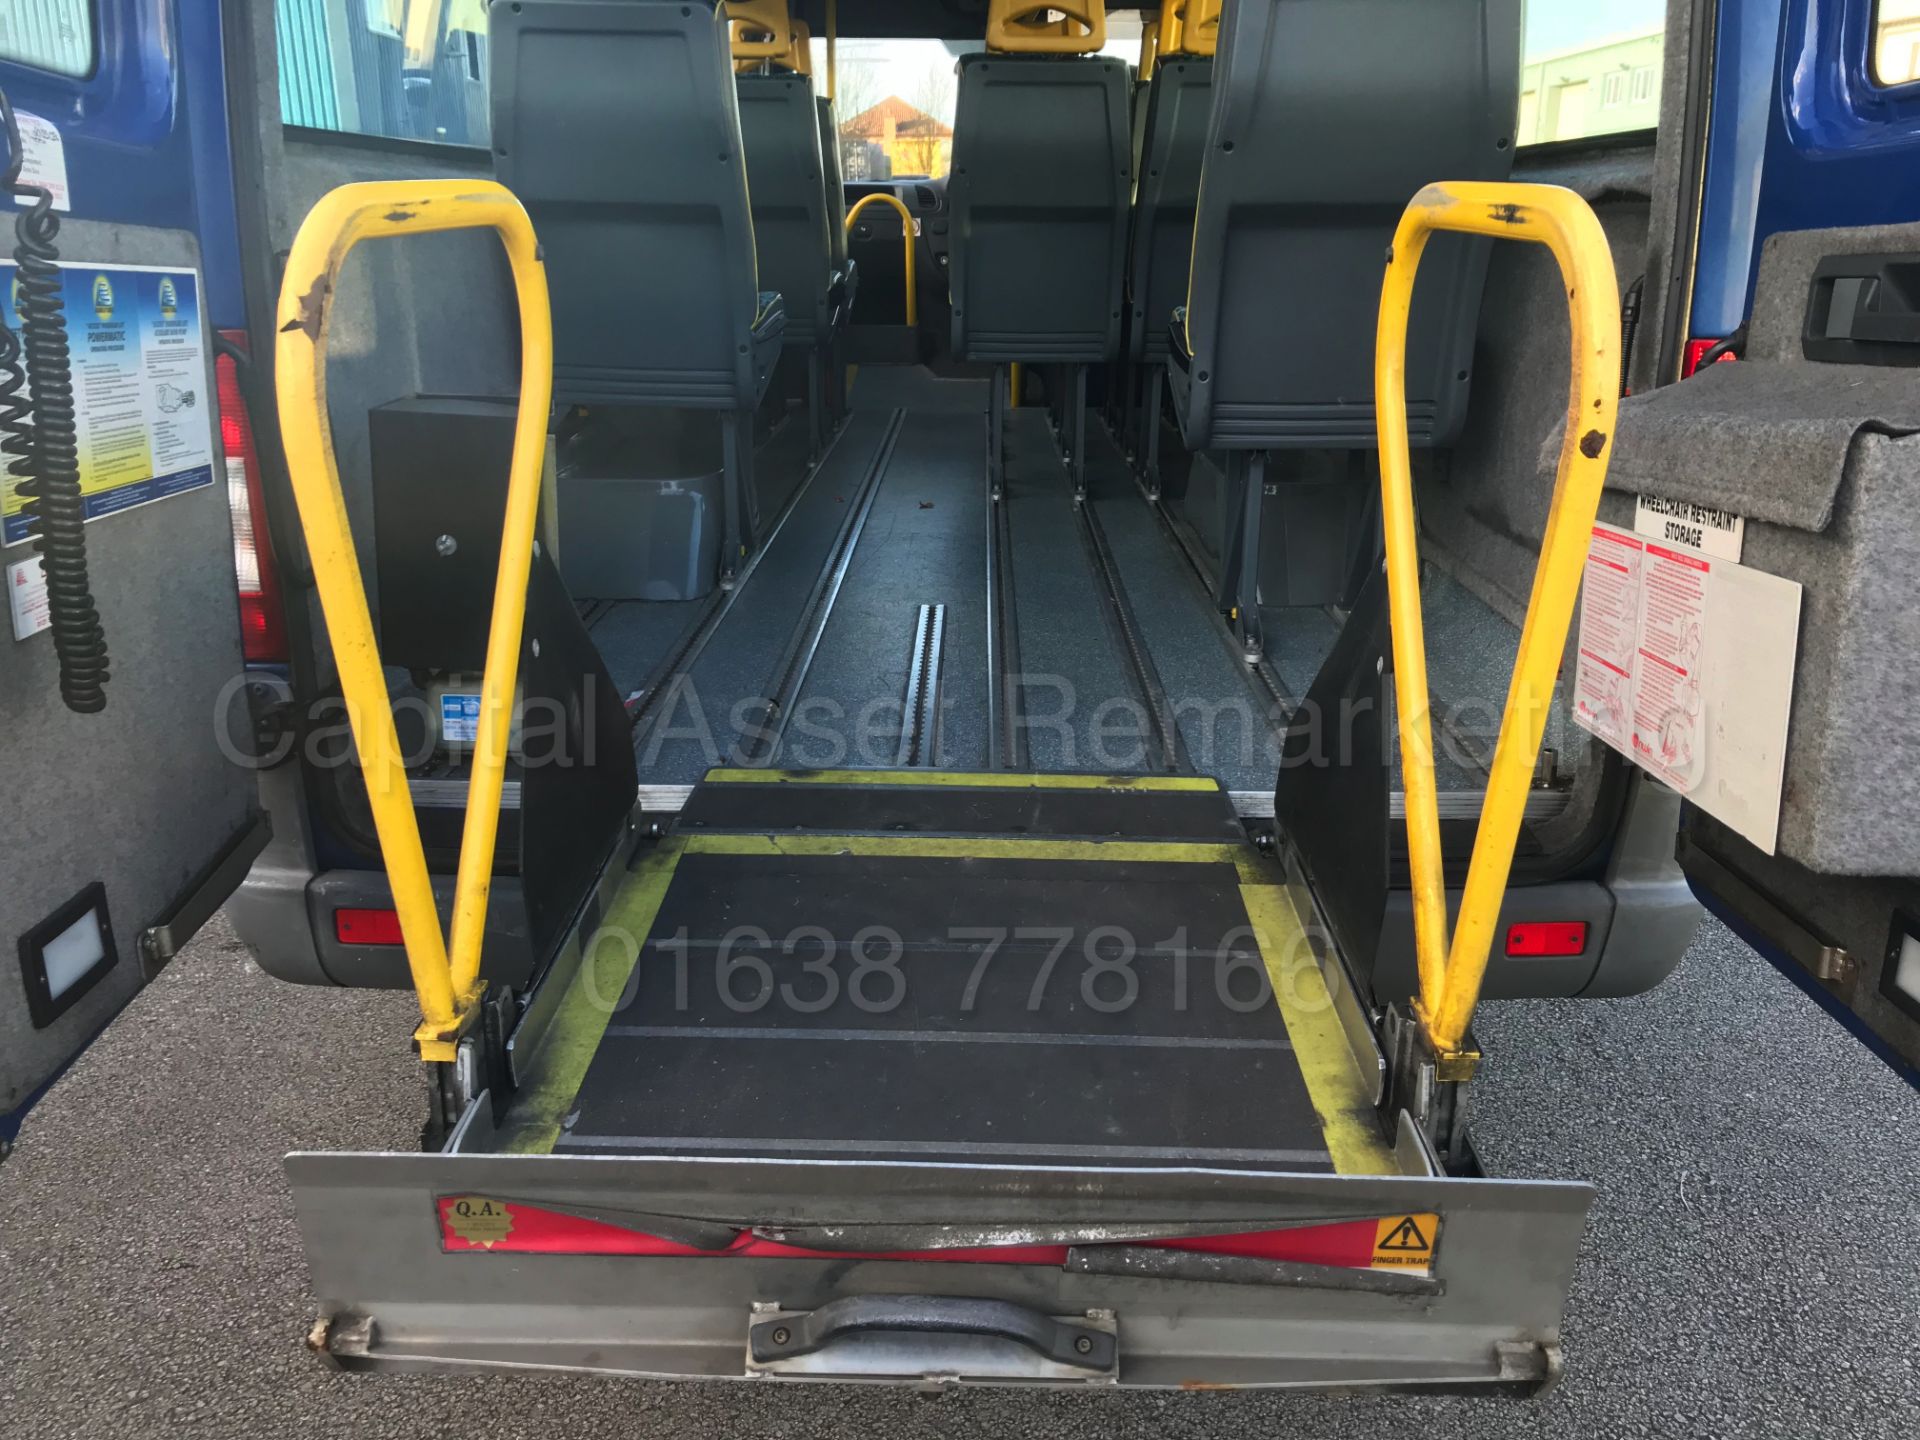 (On Sale) MERCEDES SPRINTER 411 CDI '16 SEATER BUS' (2006 MODEL) 'COACH INTERIOR -CHAIR LIFT' *COIF* - Image 20 of 29